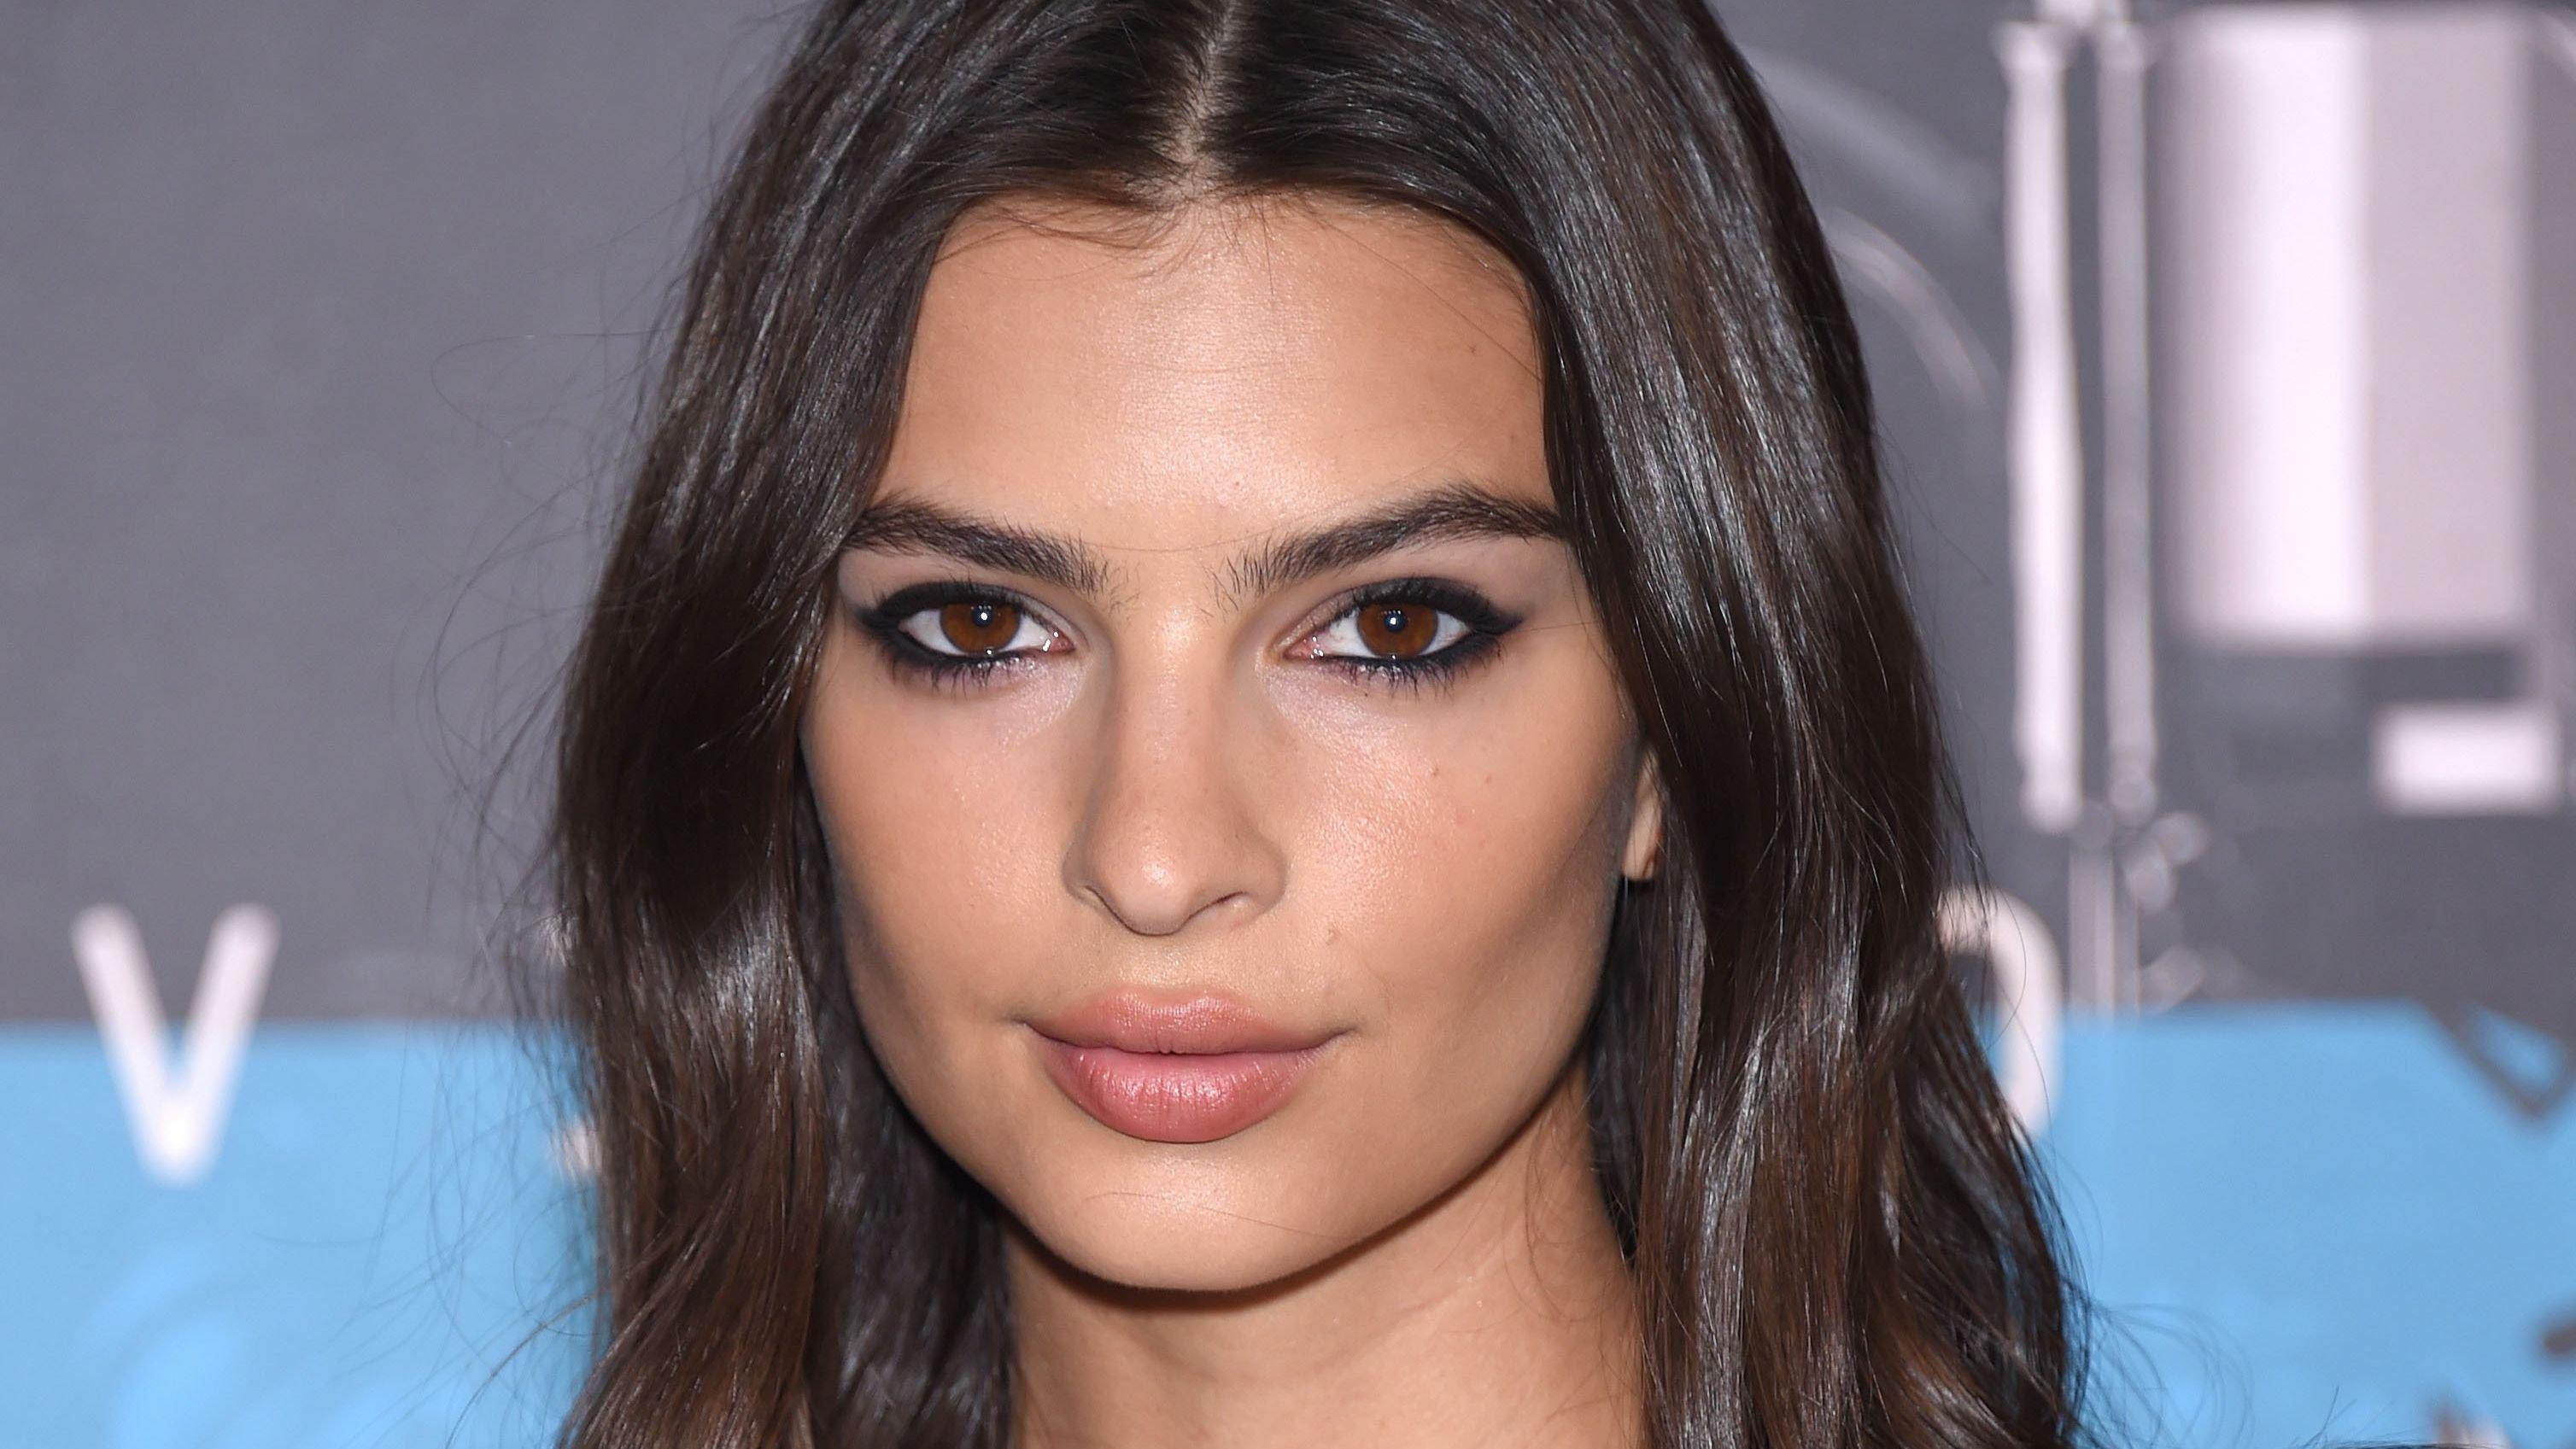 Emily Ratajkowski wears bold eyeliner and loose waves at an event.